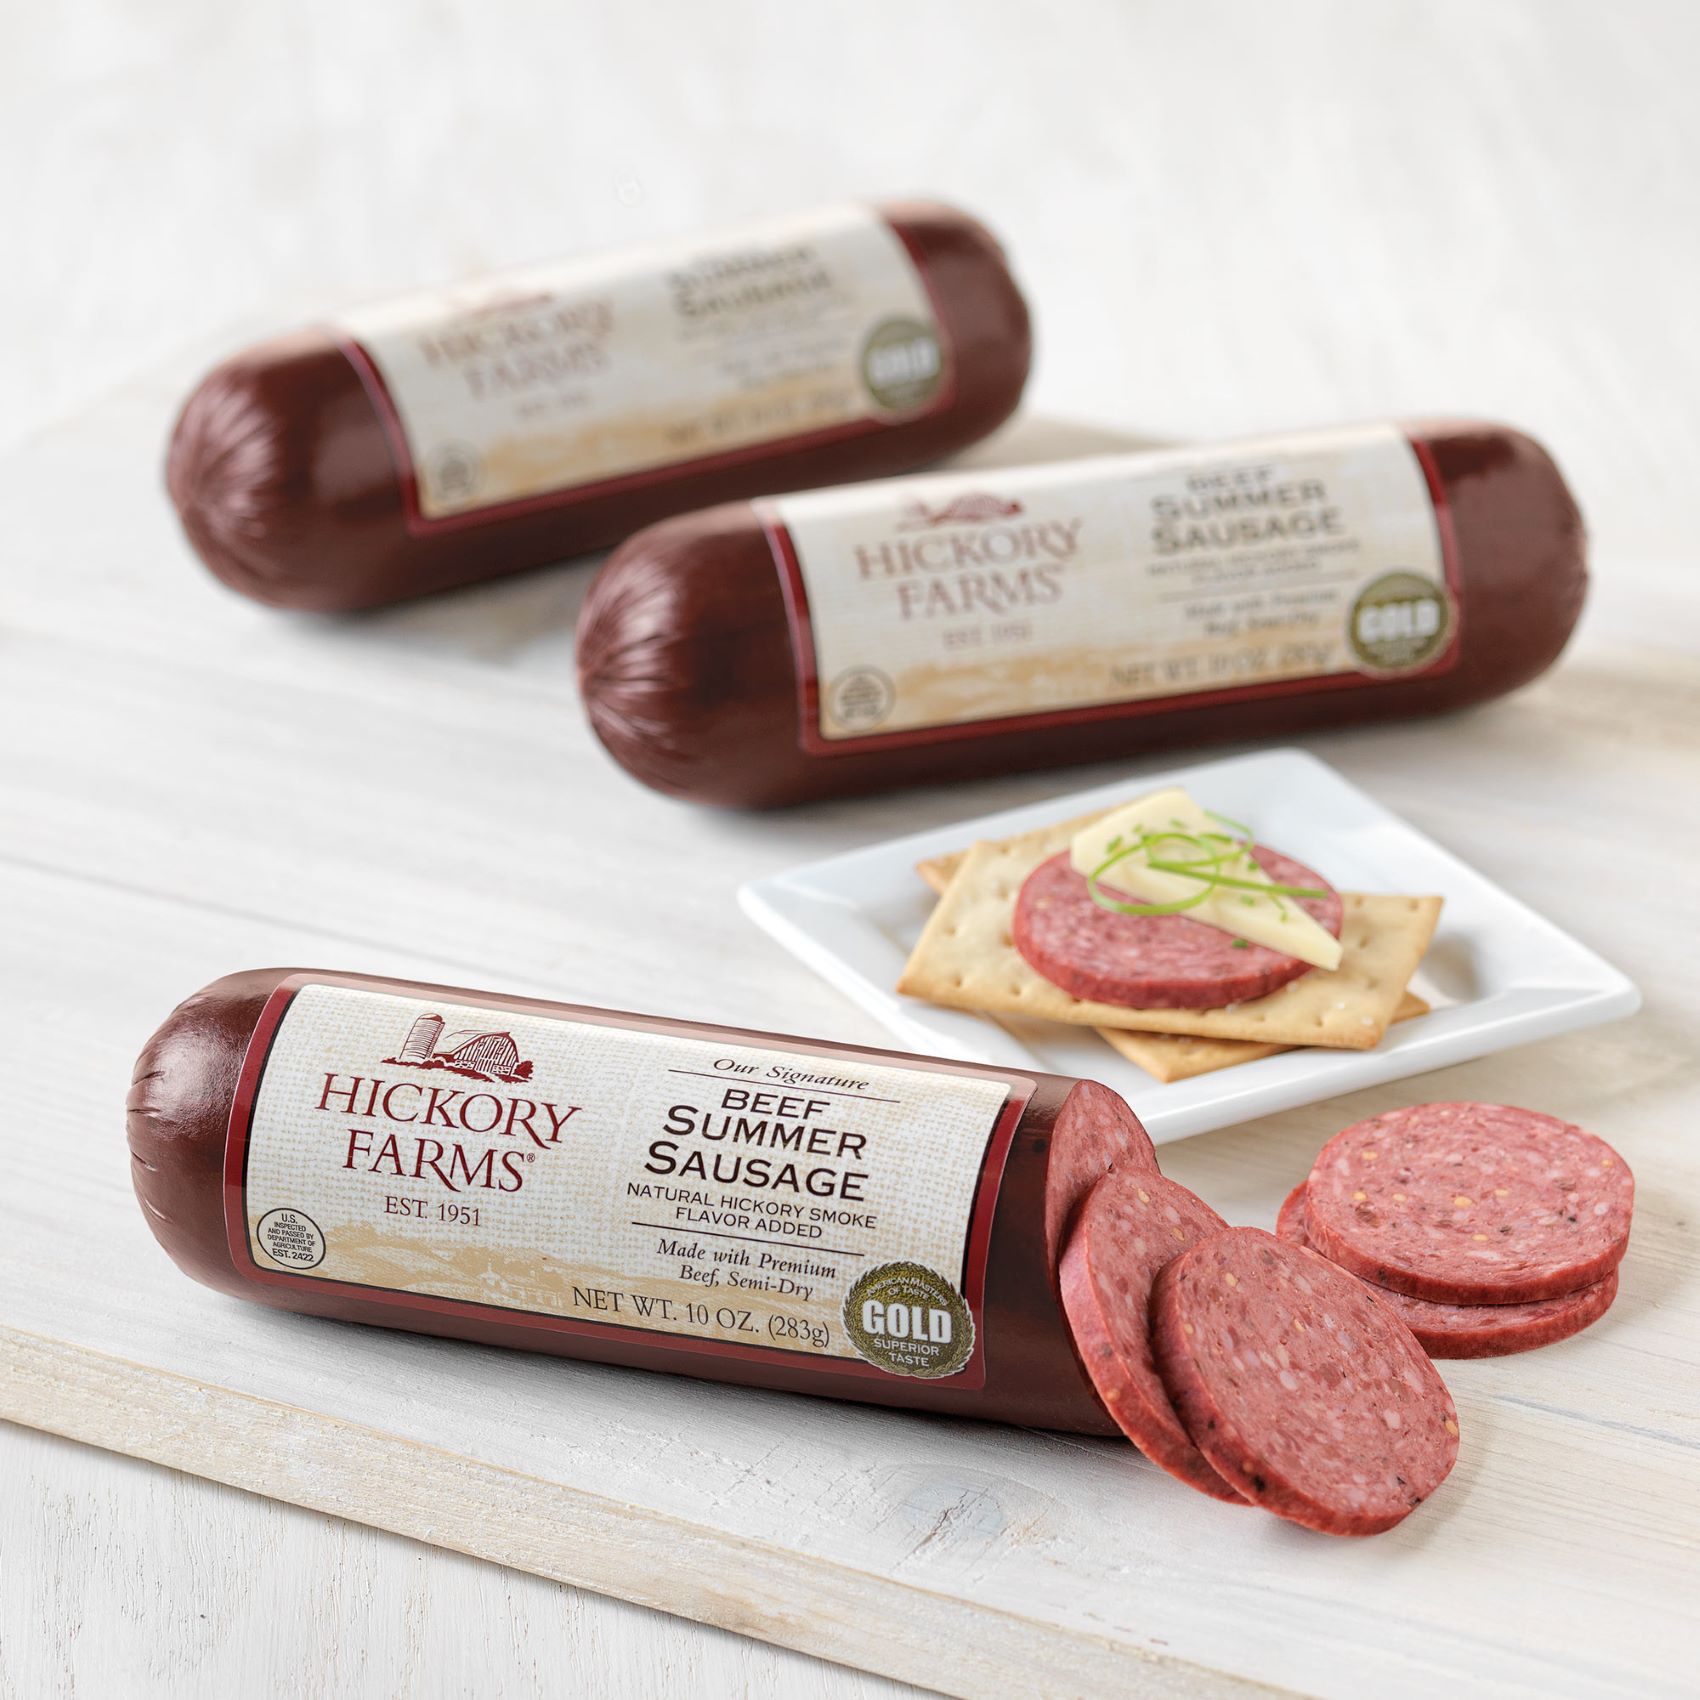 How To Store Summer Sausage